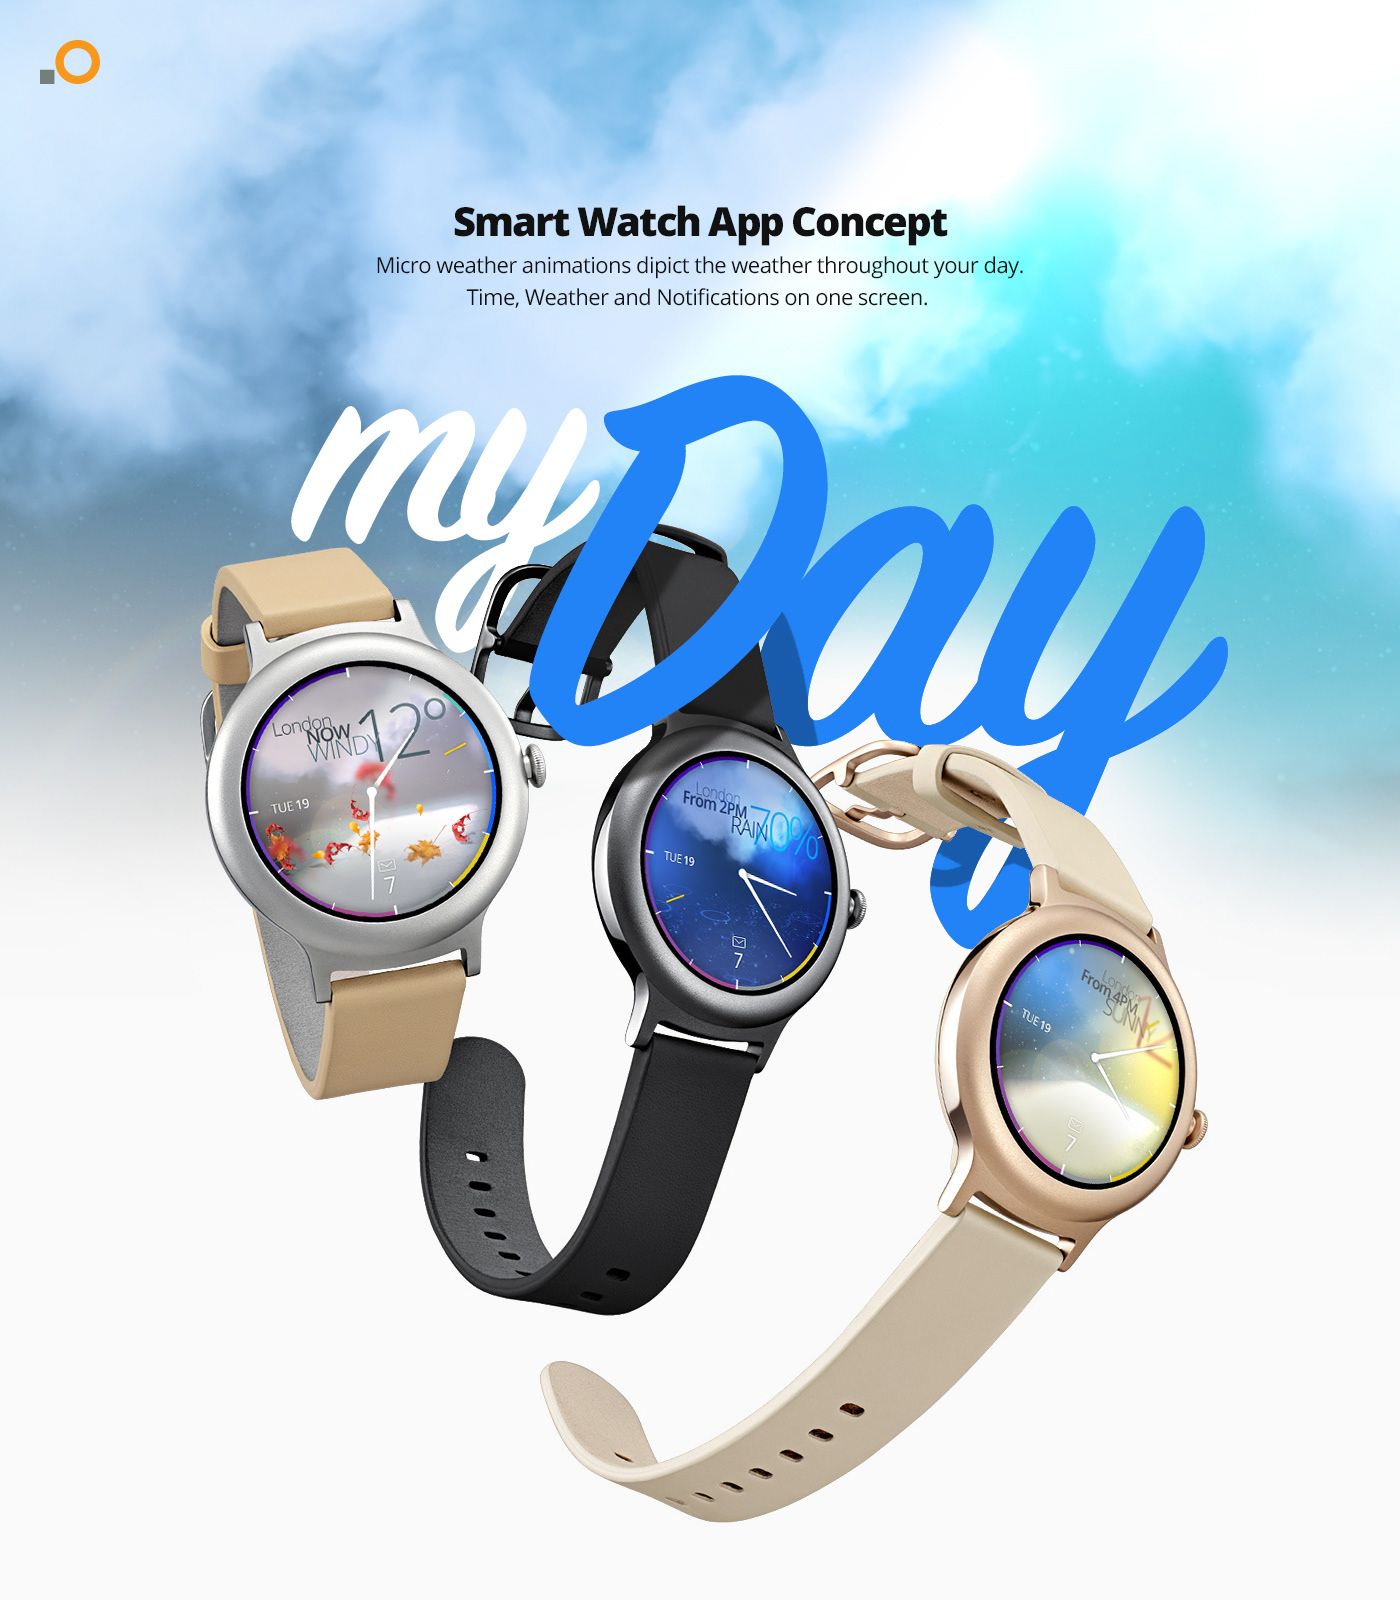 UI ux interaction motion concept app Wearable smartwatch watch weather